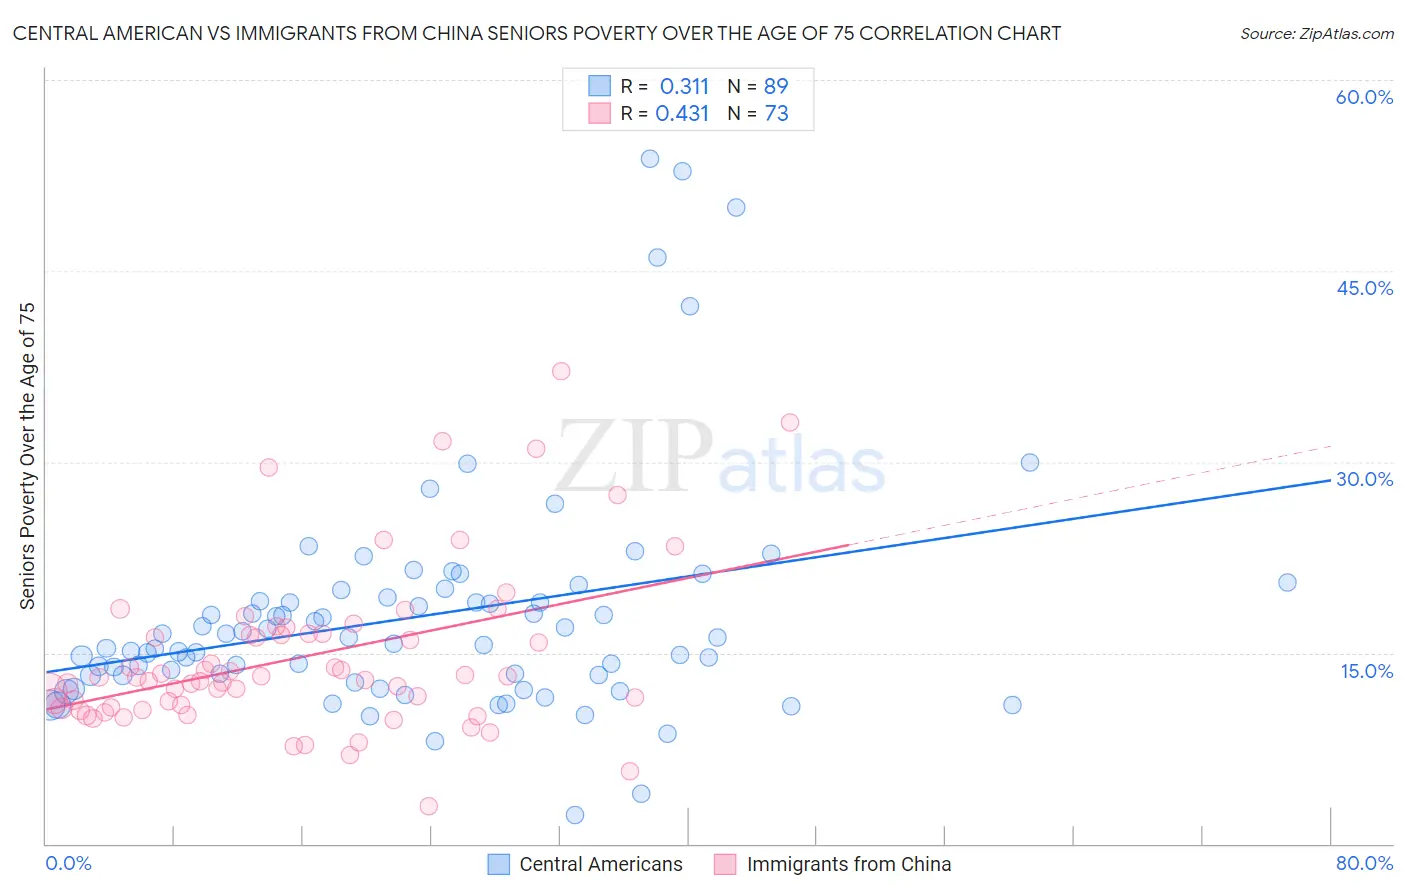 Central American vs Immigrants from China Seniors Poverty Over the Age of 75